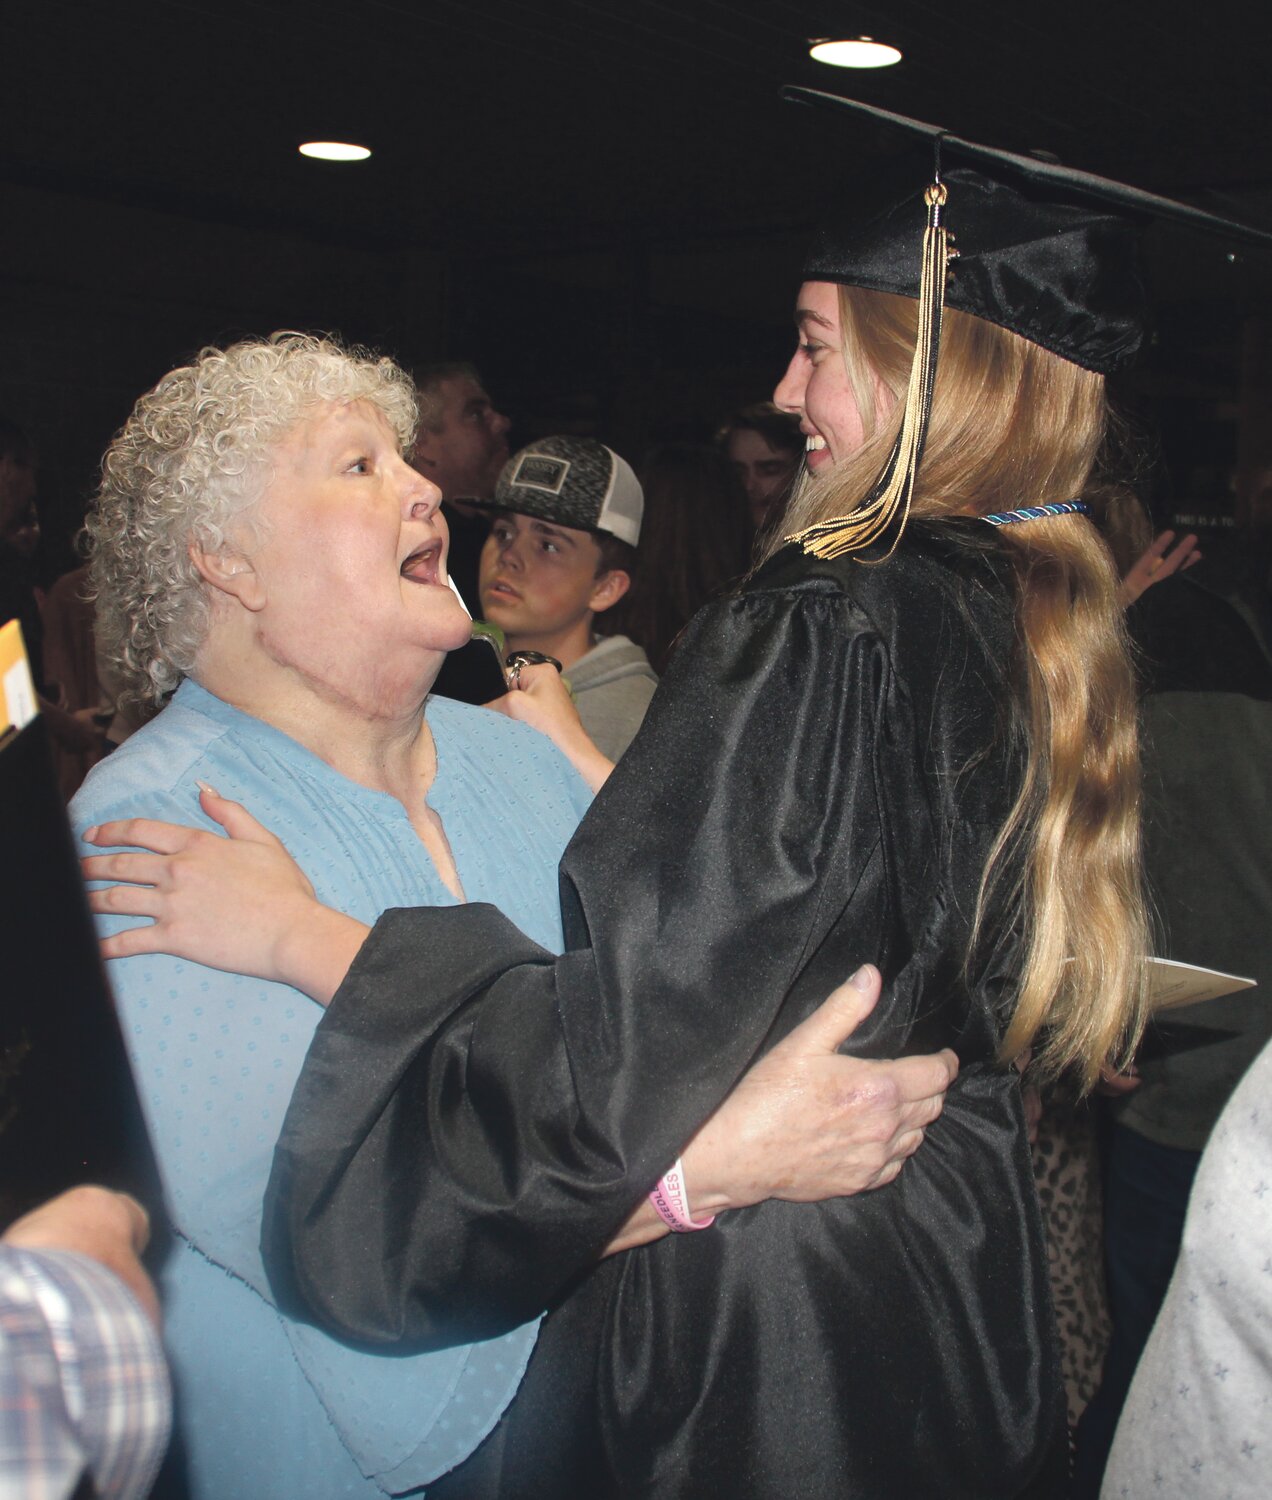 A grandma’s love: Brenda Young celebrates with her granddaughter Katelyn Finley at Lebanon High School graduation Friday.